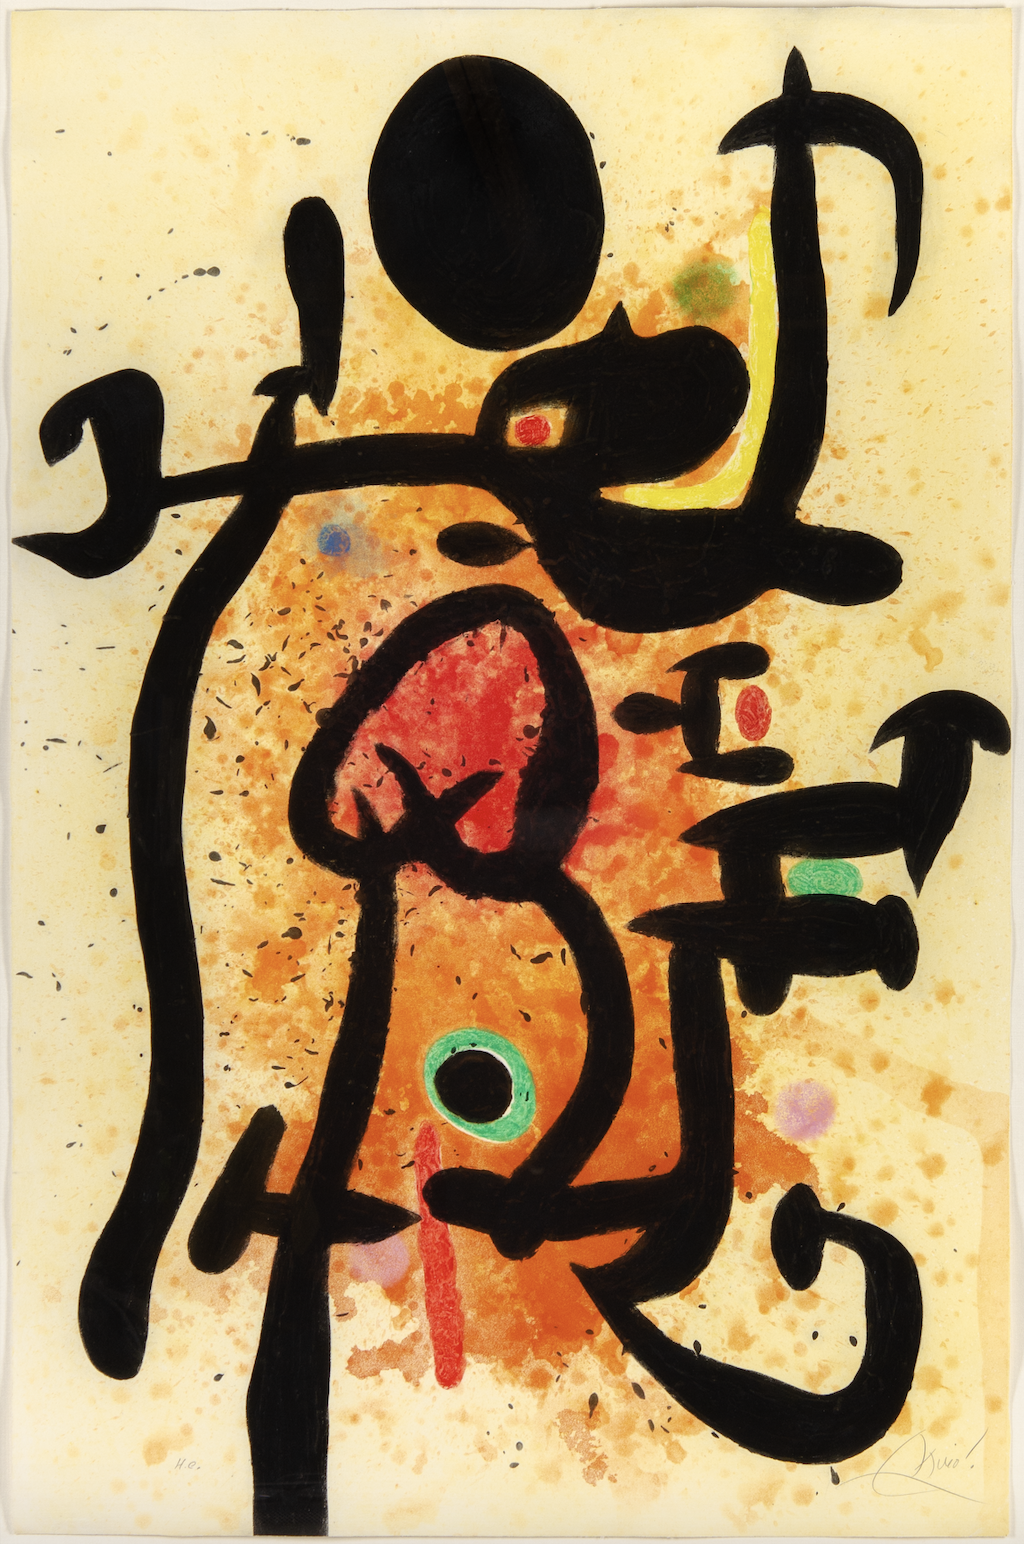 Painting by Joan Miro at Zeit Contemporary